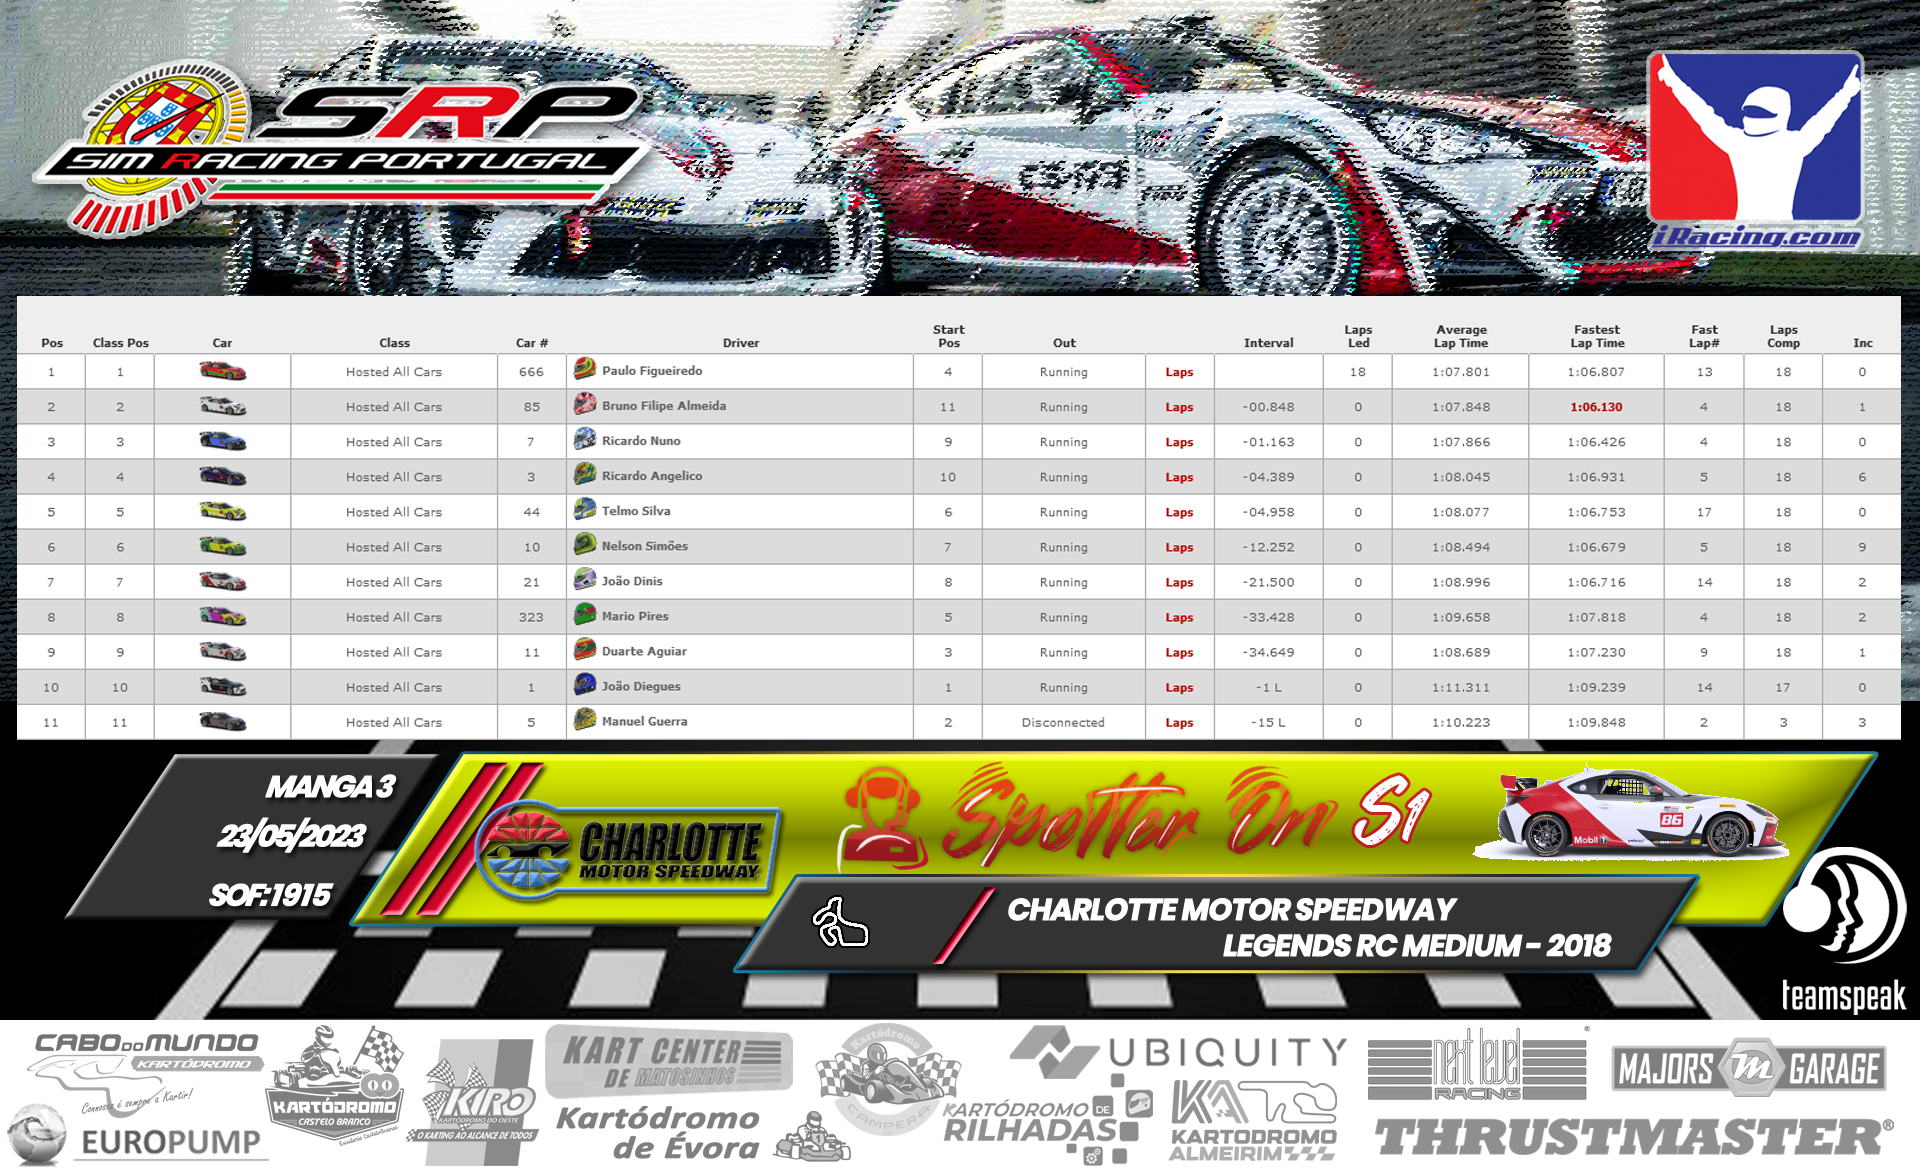 [Image: RaceResults-SpotterOn3-2.png]